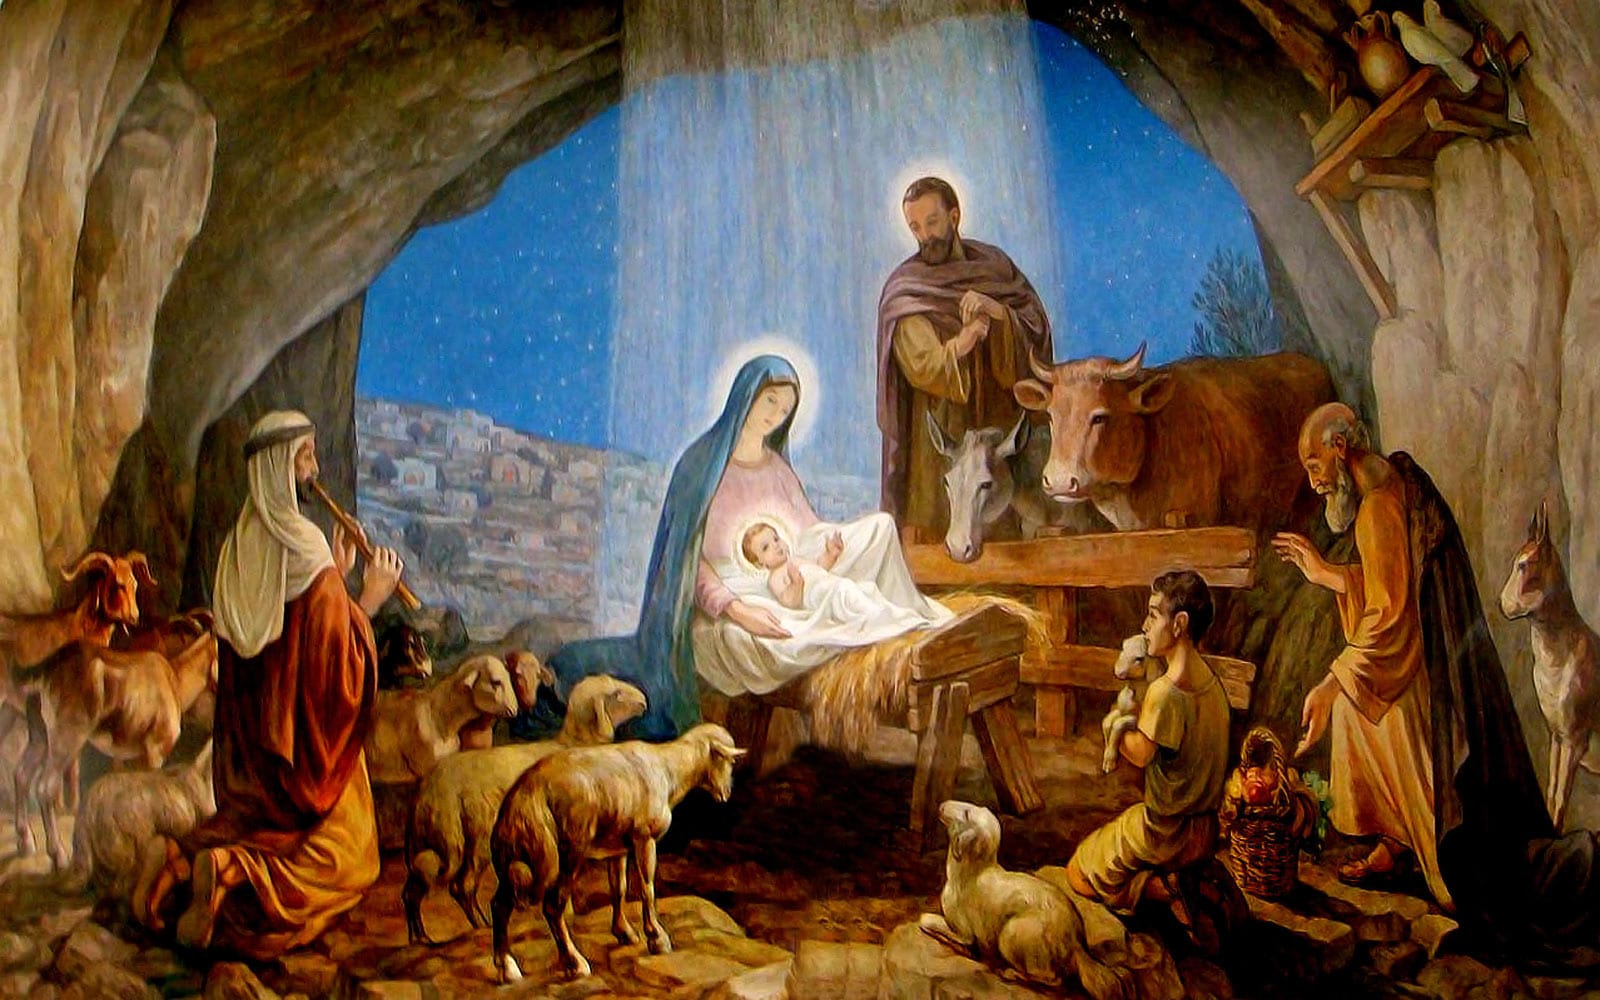 The Nativity Scene Opens Our Hearts To The Mystery Of Life Hli